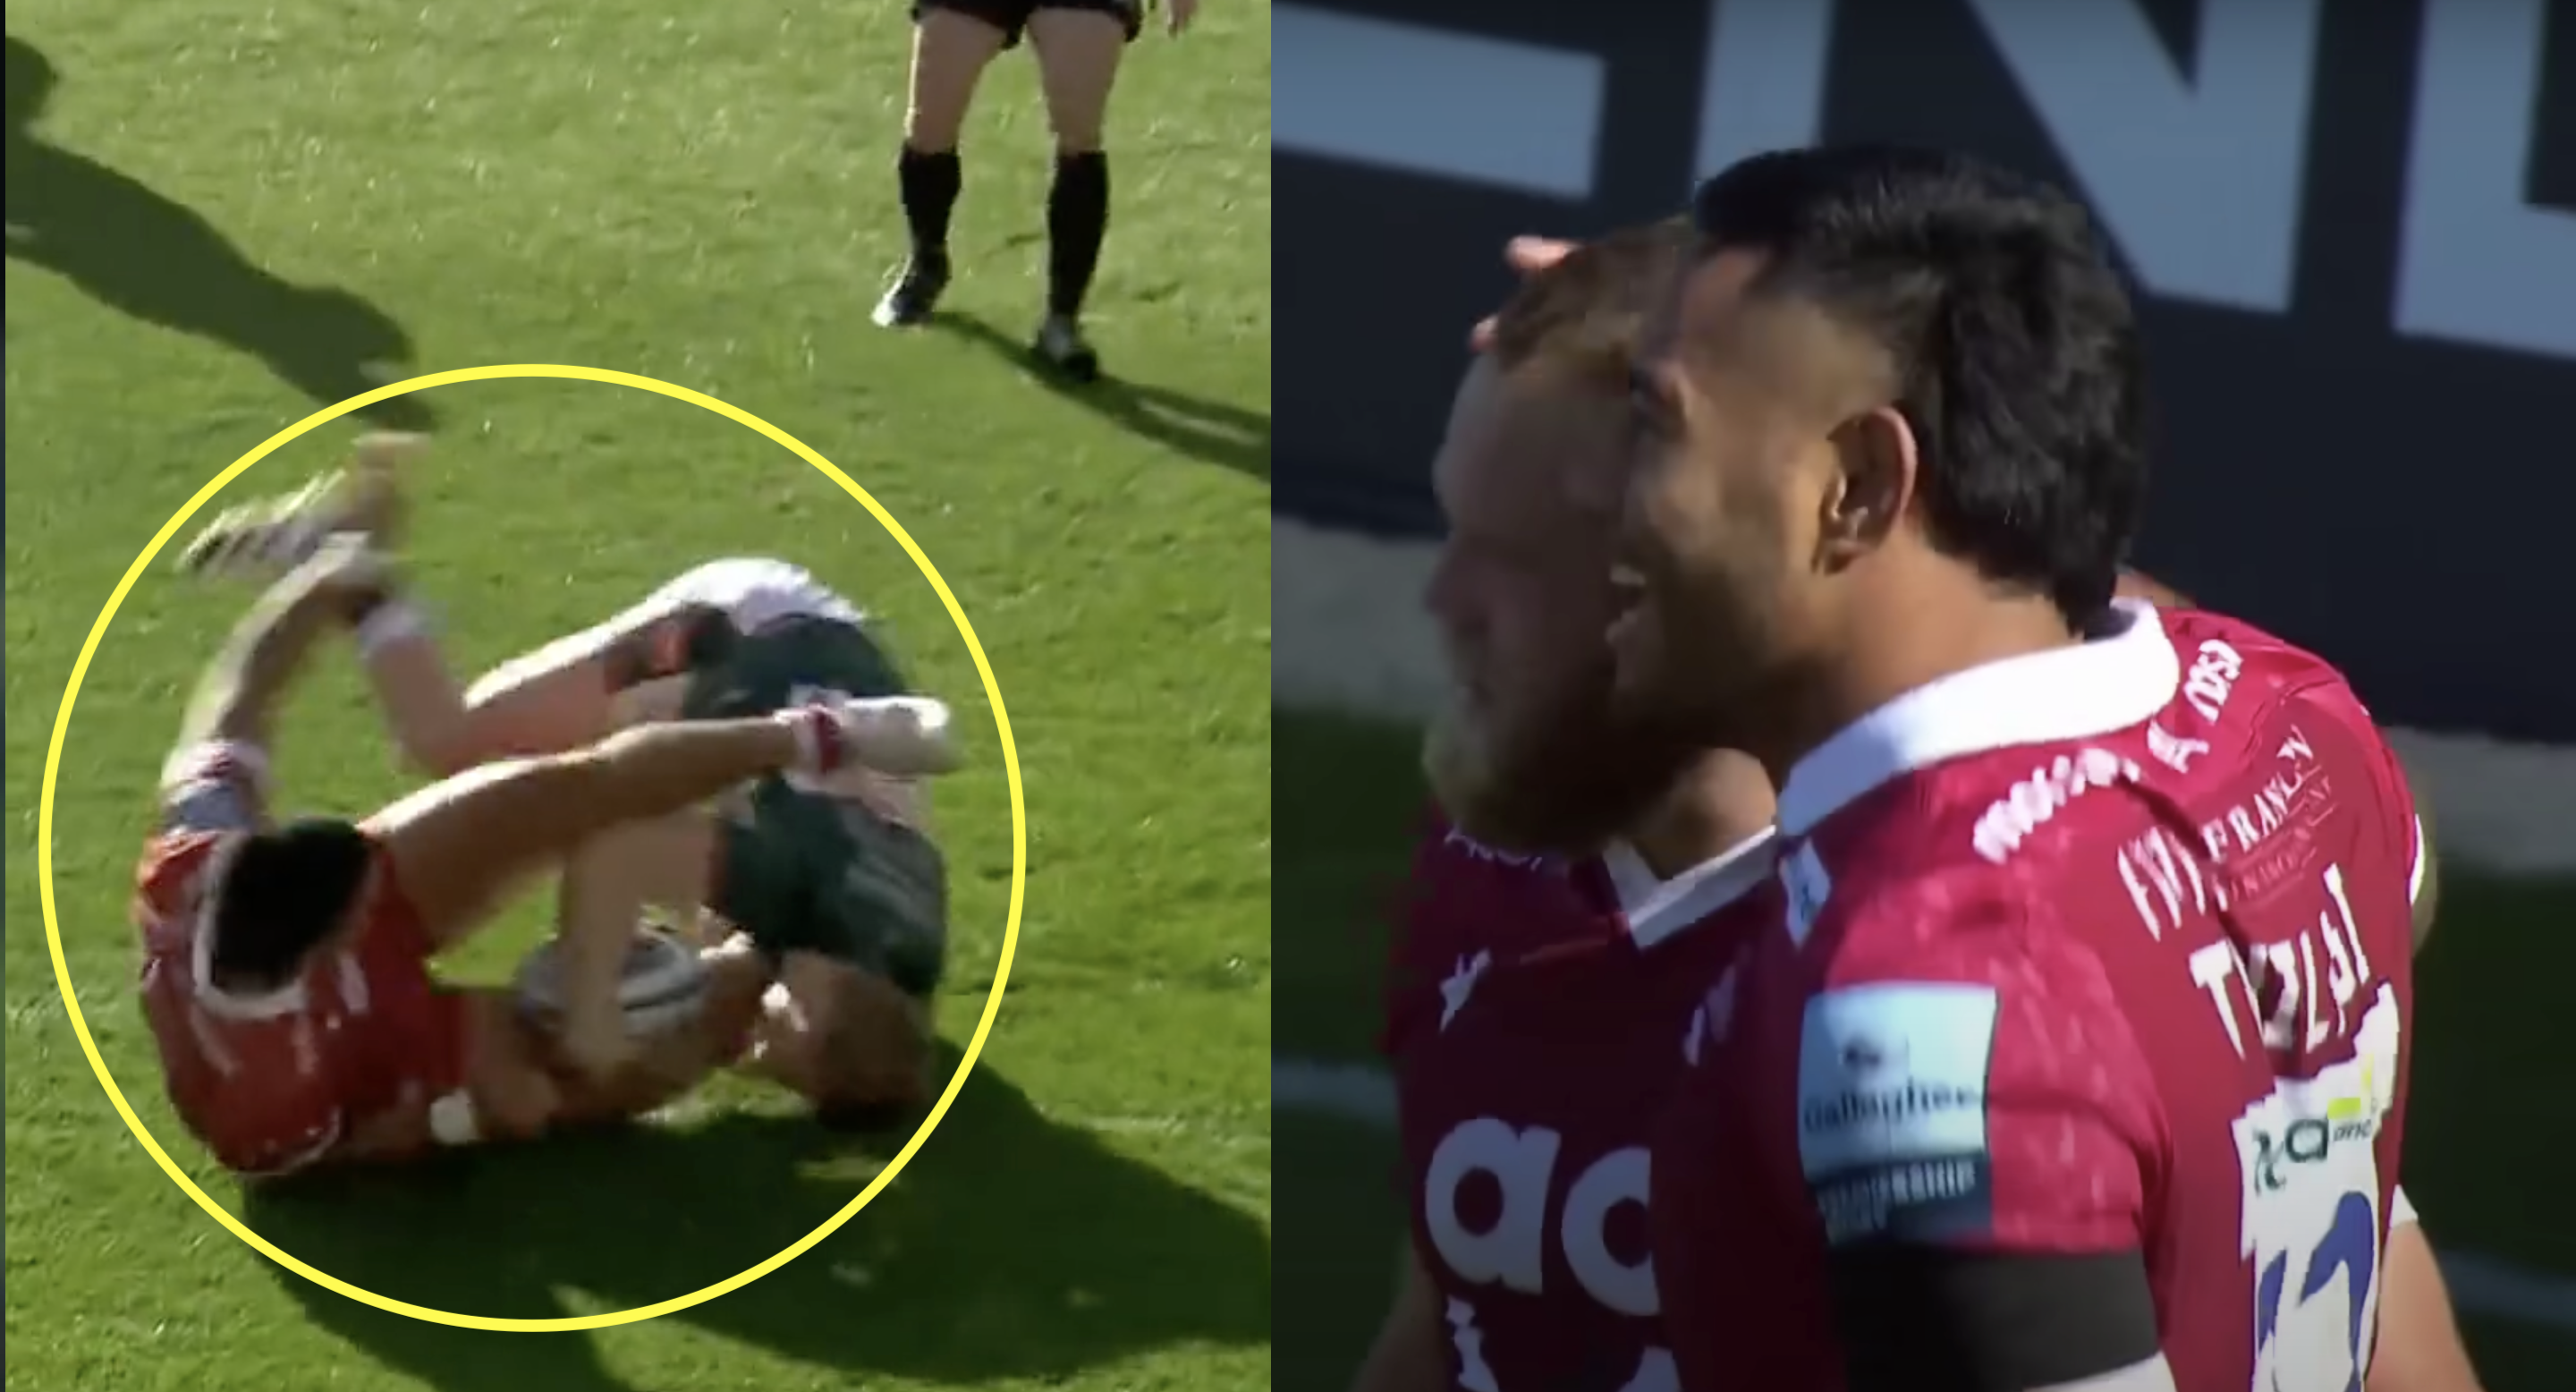 Entire crowd winces as Manu Tuilagi flattens unsuspecting opponent